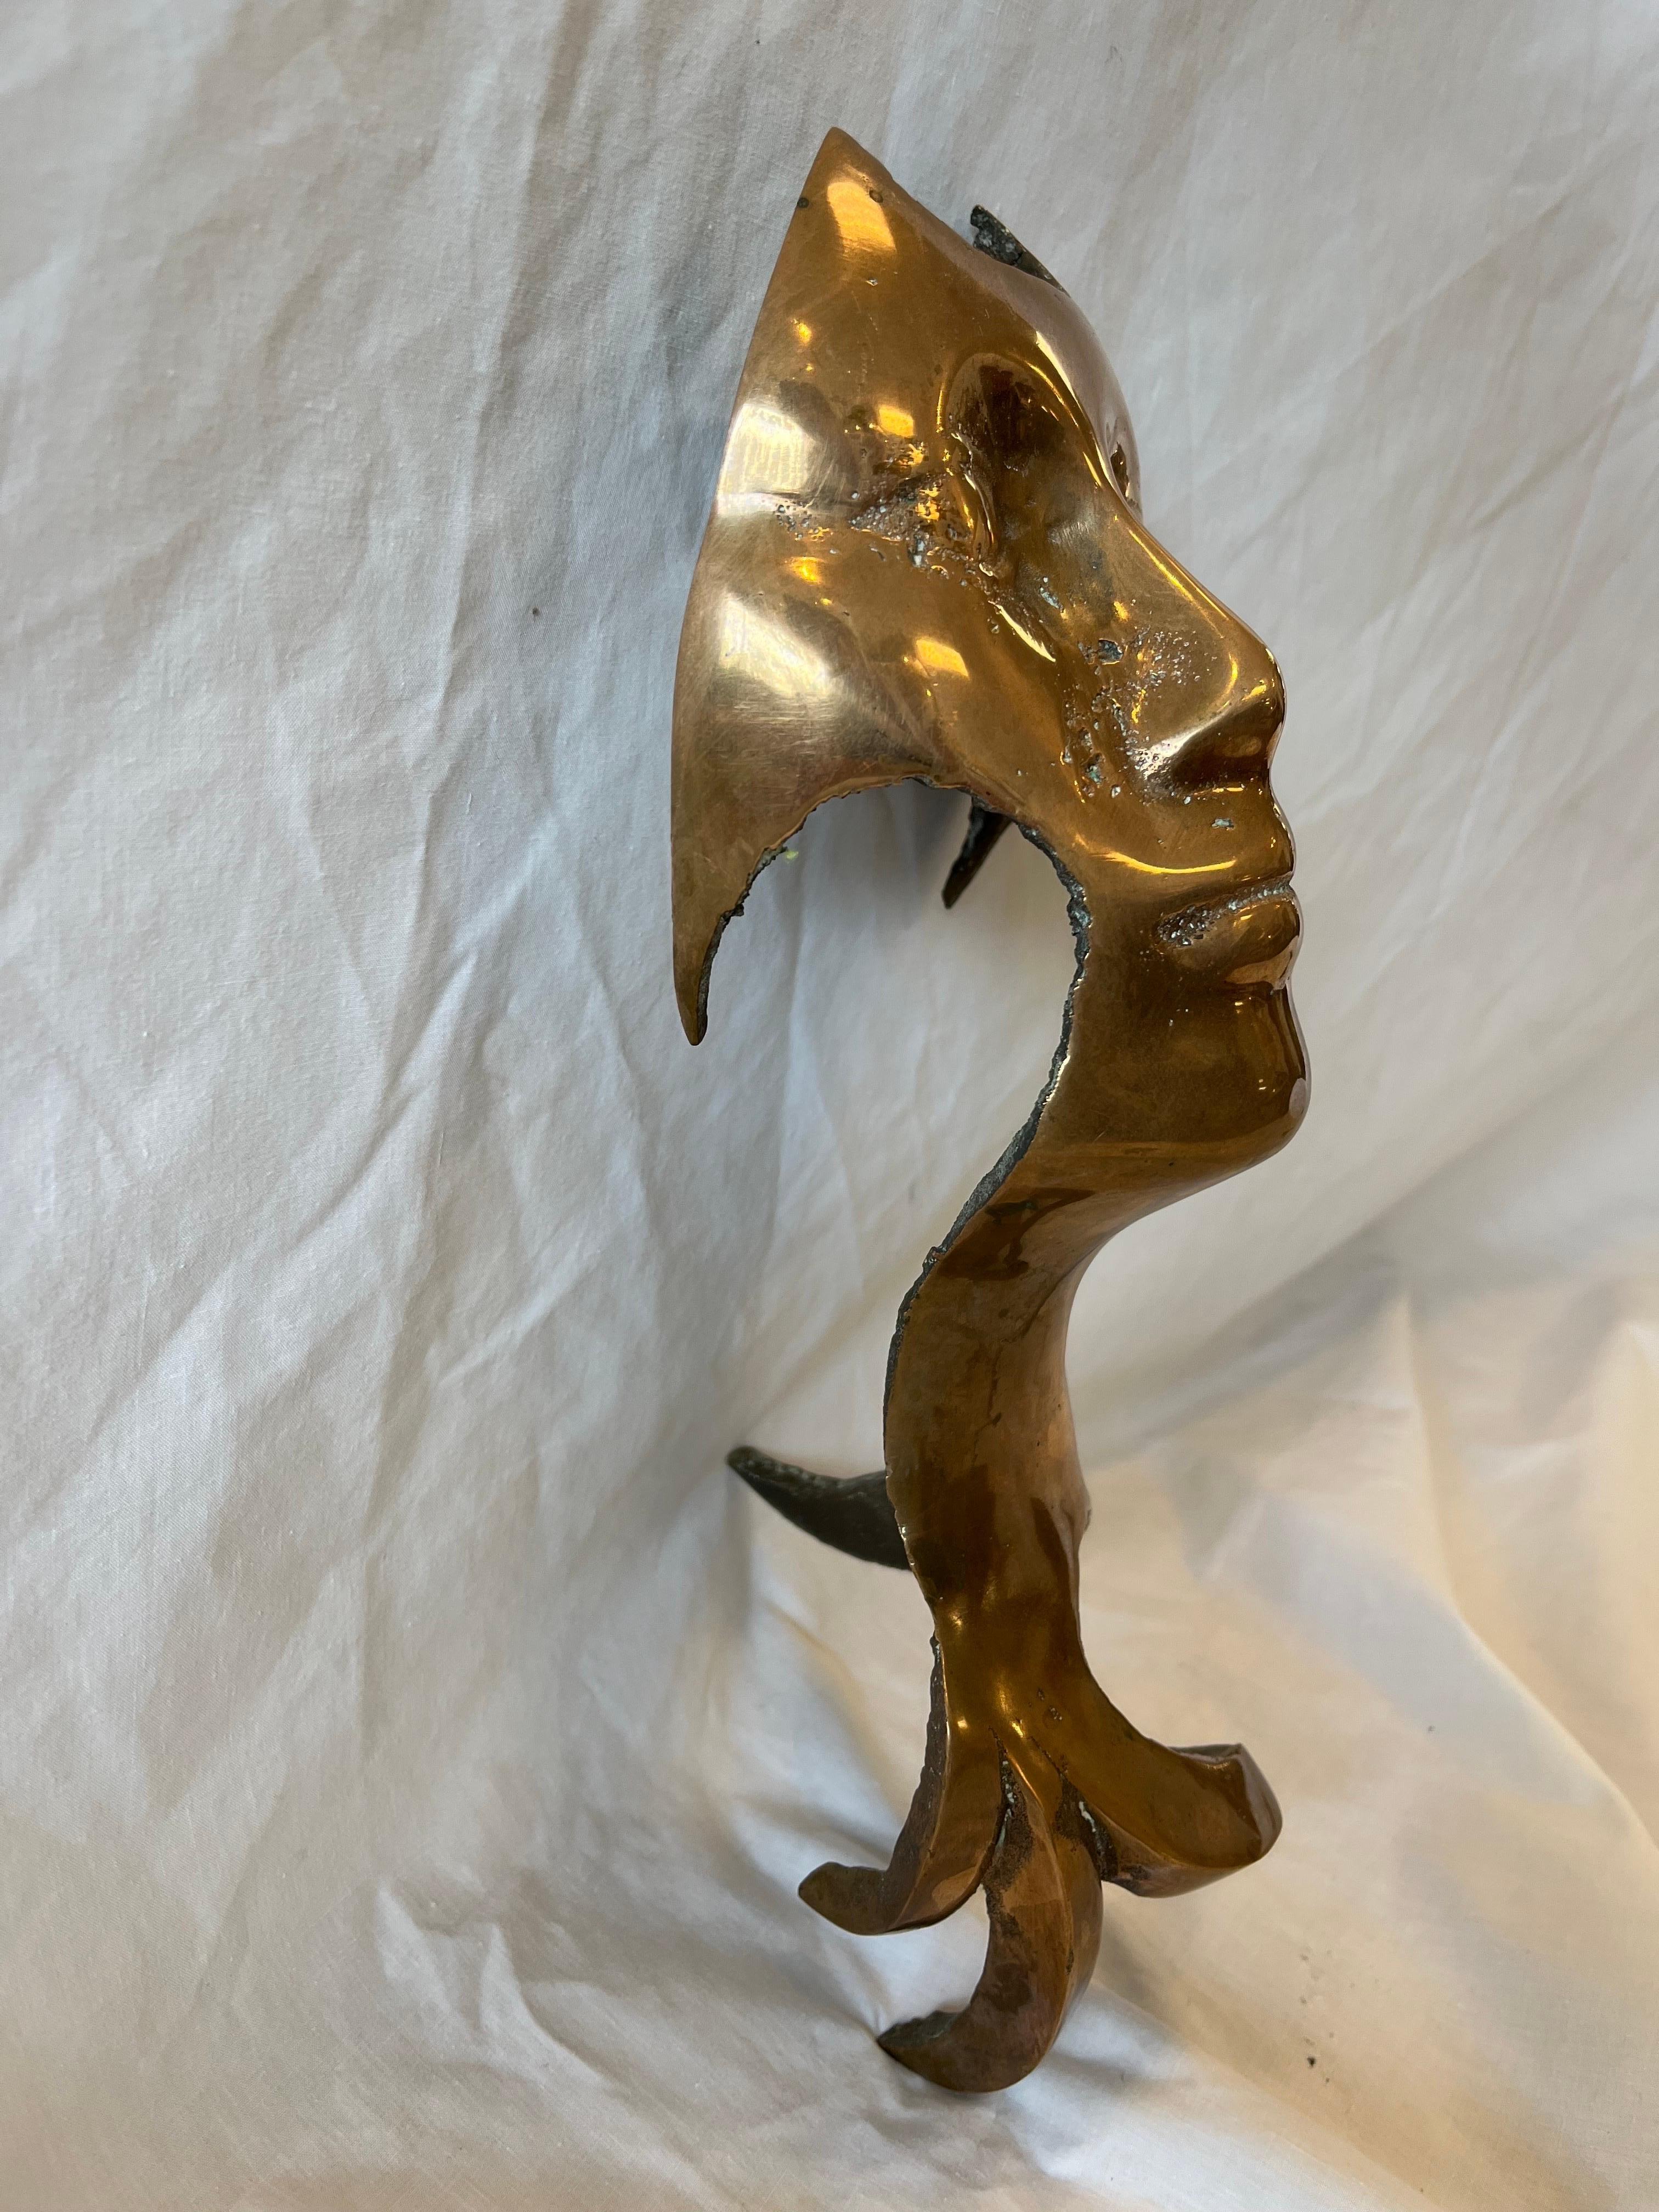 American Abstract Three Quarter Life Size 1980s Figural Bronze Sculpture by J M Labret